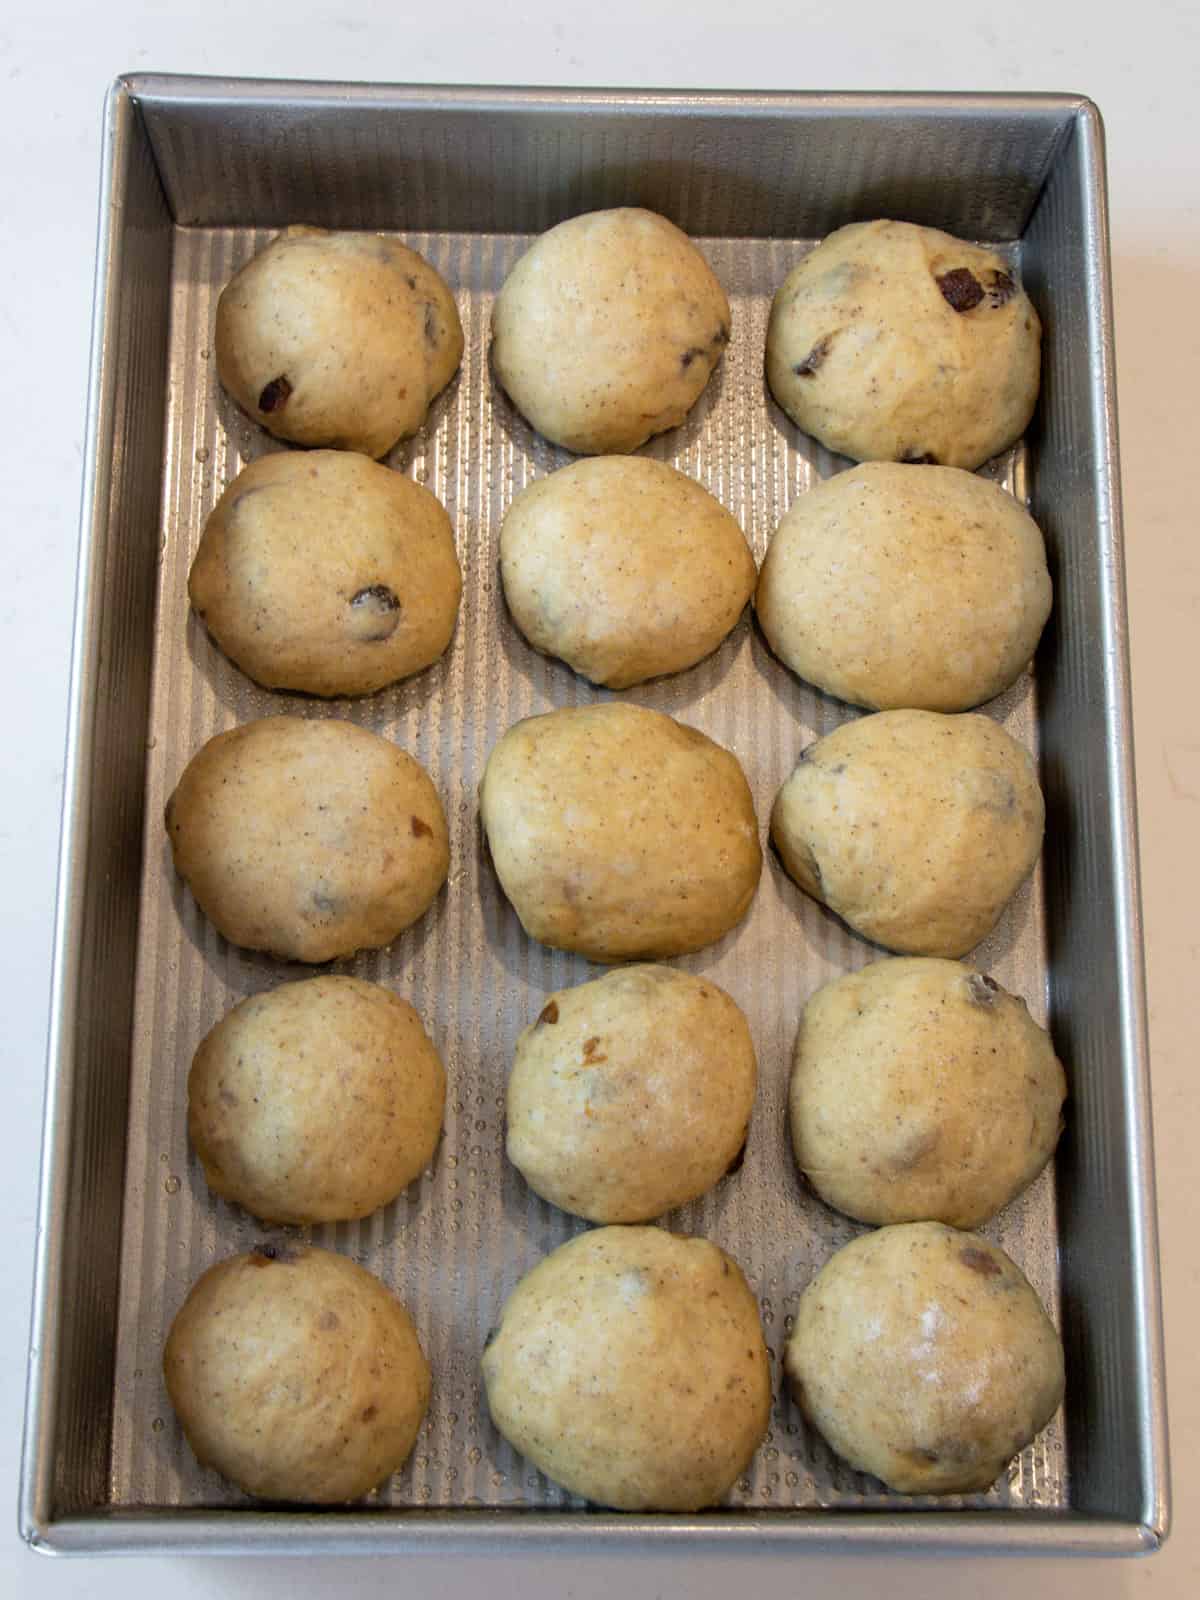 Rolls of dough evenly spaced in a metal baking dish.